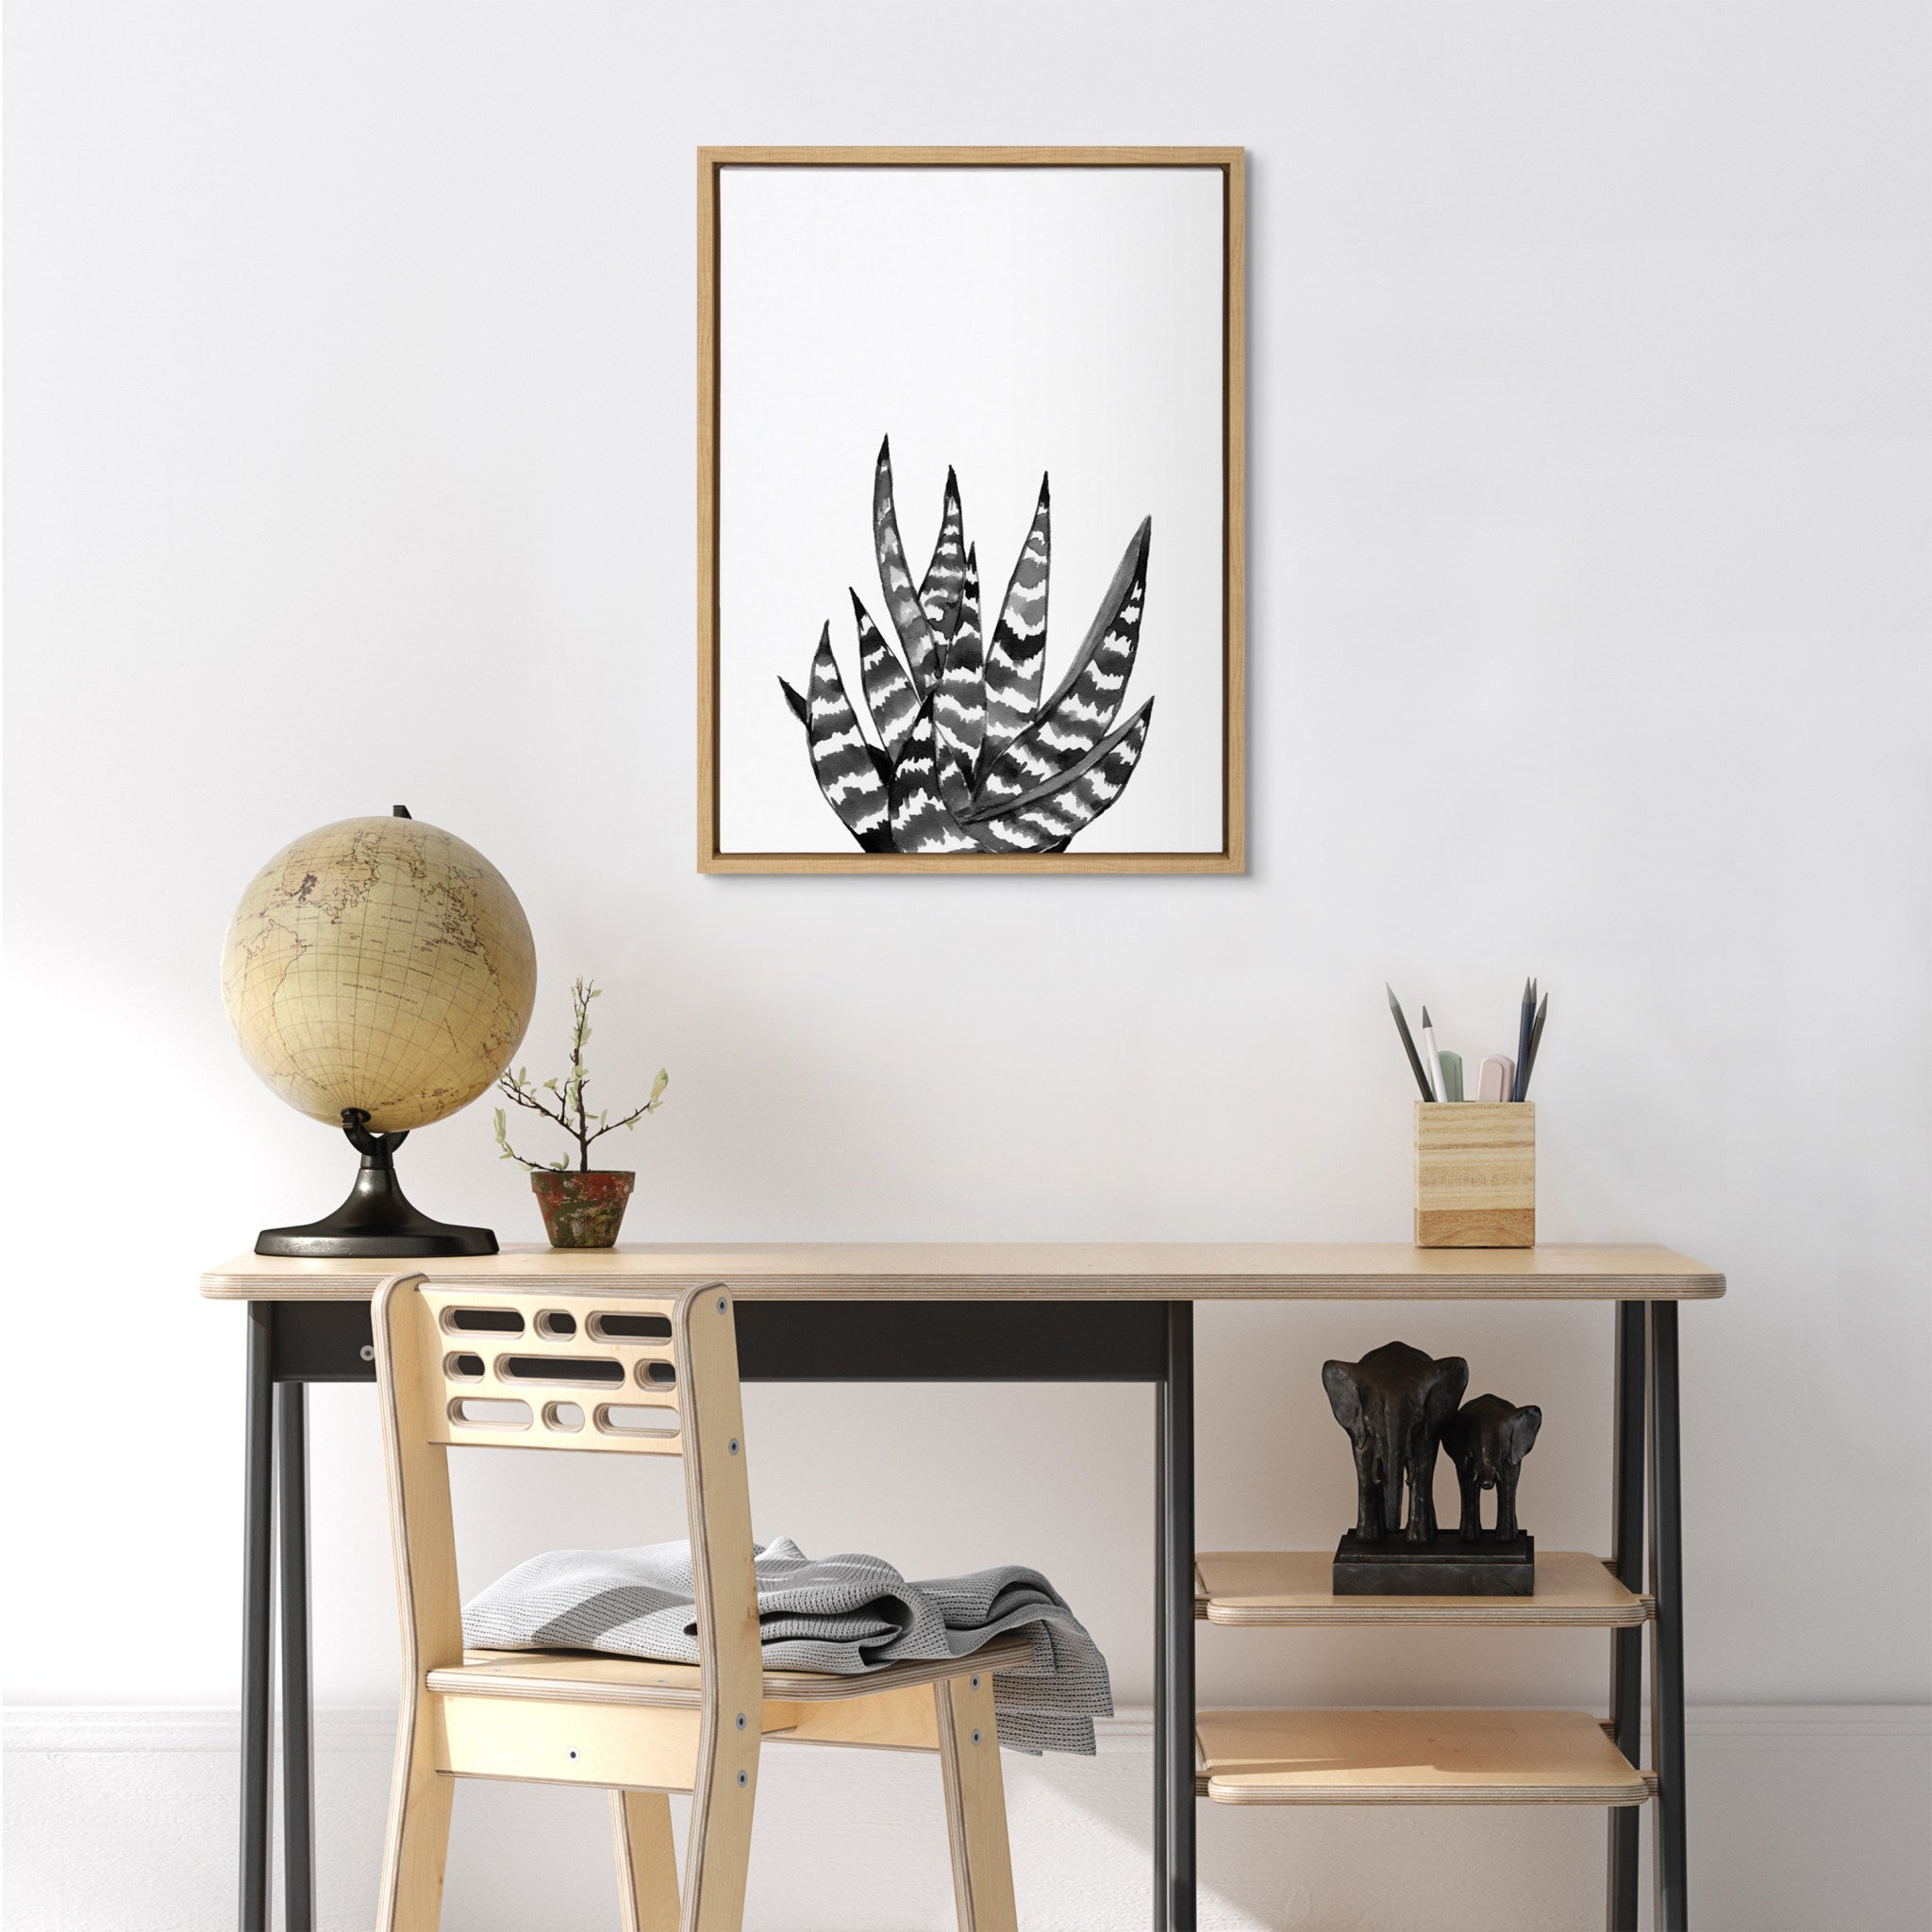 Sylvie It Can Be a Zebra Framed Canvas by Maja Mitrovic of Makes My Day Happy